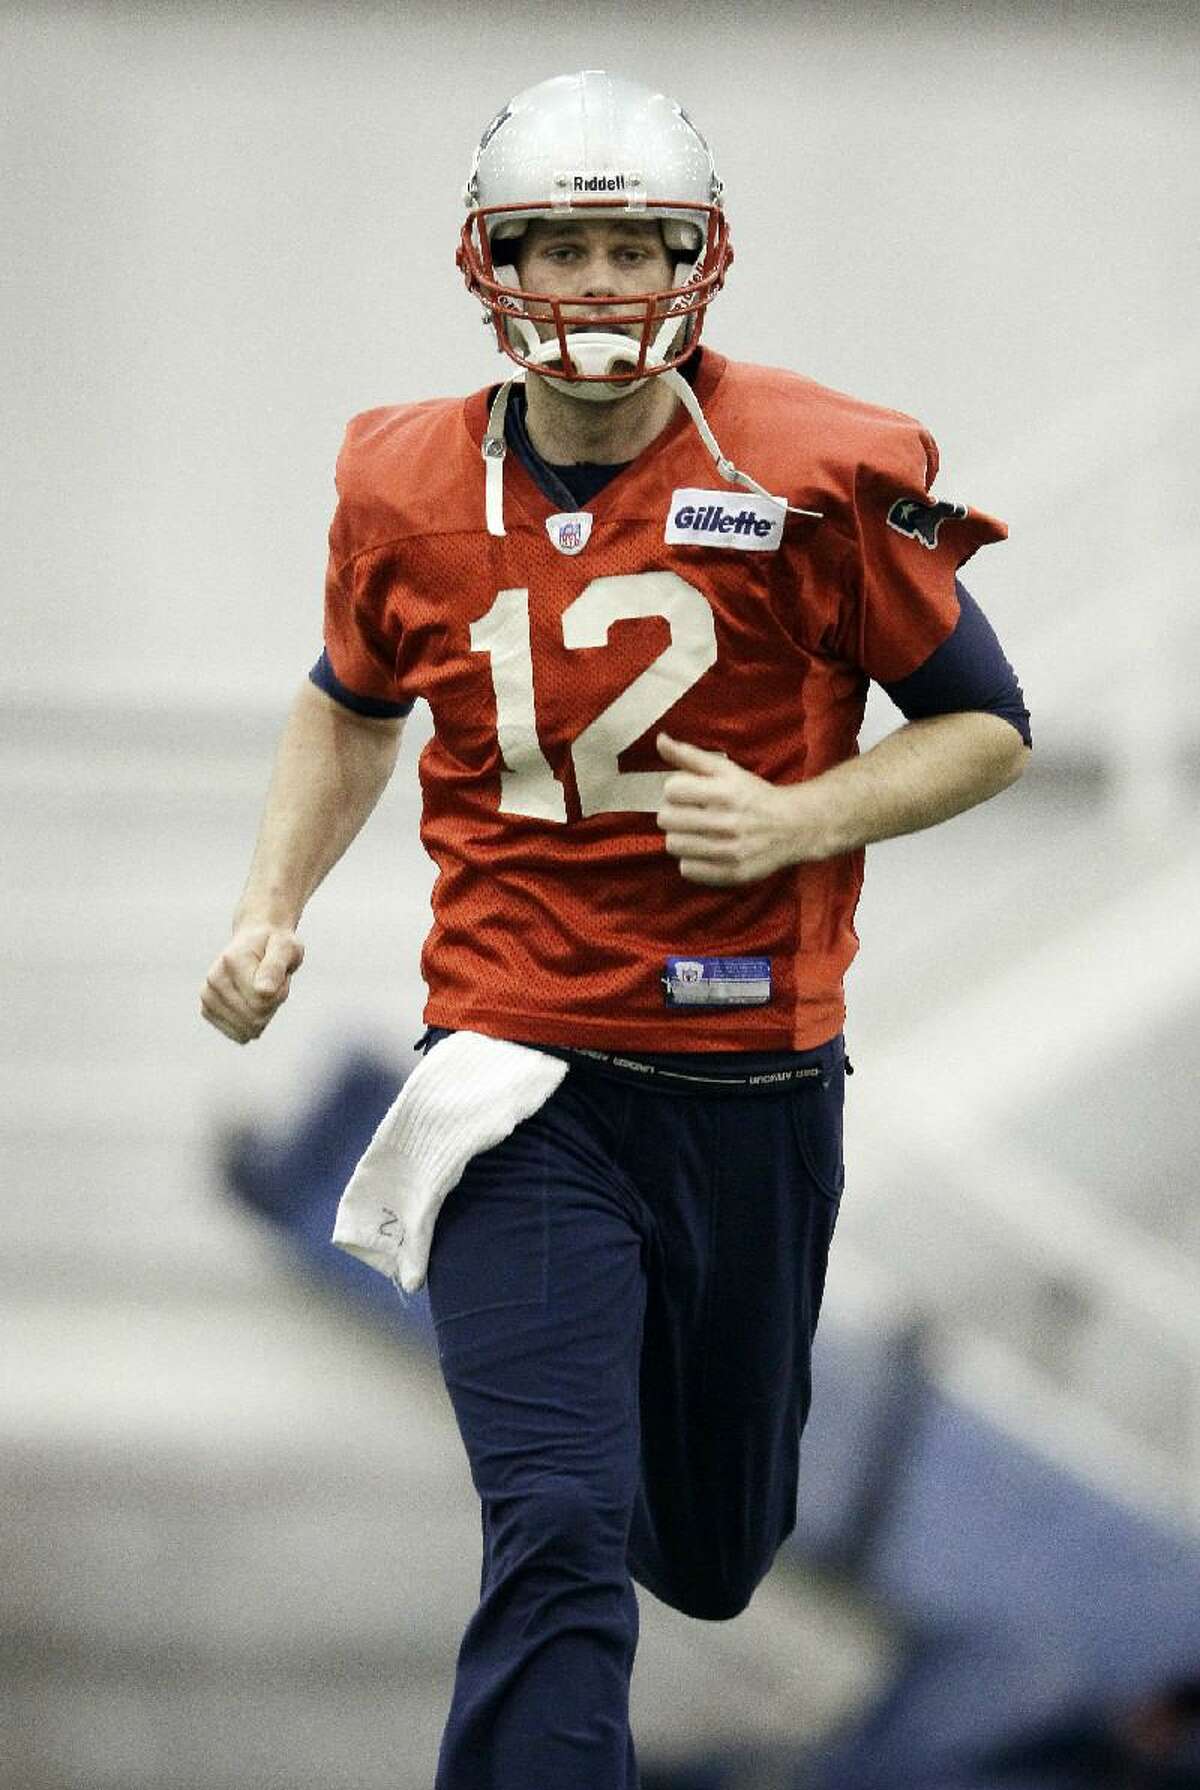 ASSOCIATED PRESS New England Patriots quarterback Tom Brady (12) runs during practice on Wednesday in Indianapolis. The Patriots are scheduled to face the New York Giants in Super Bowl XLVI Sunday.